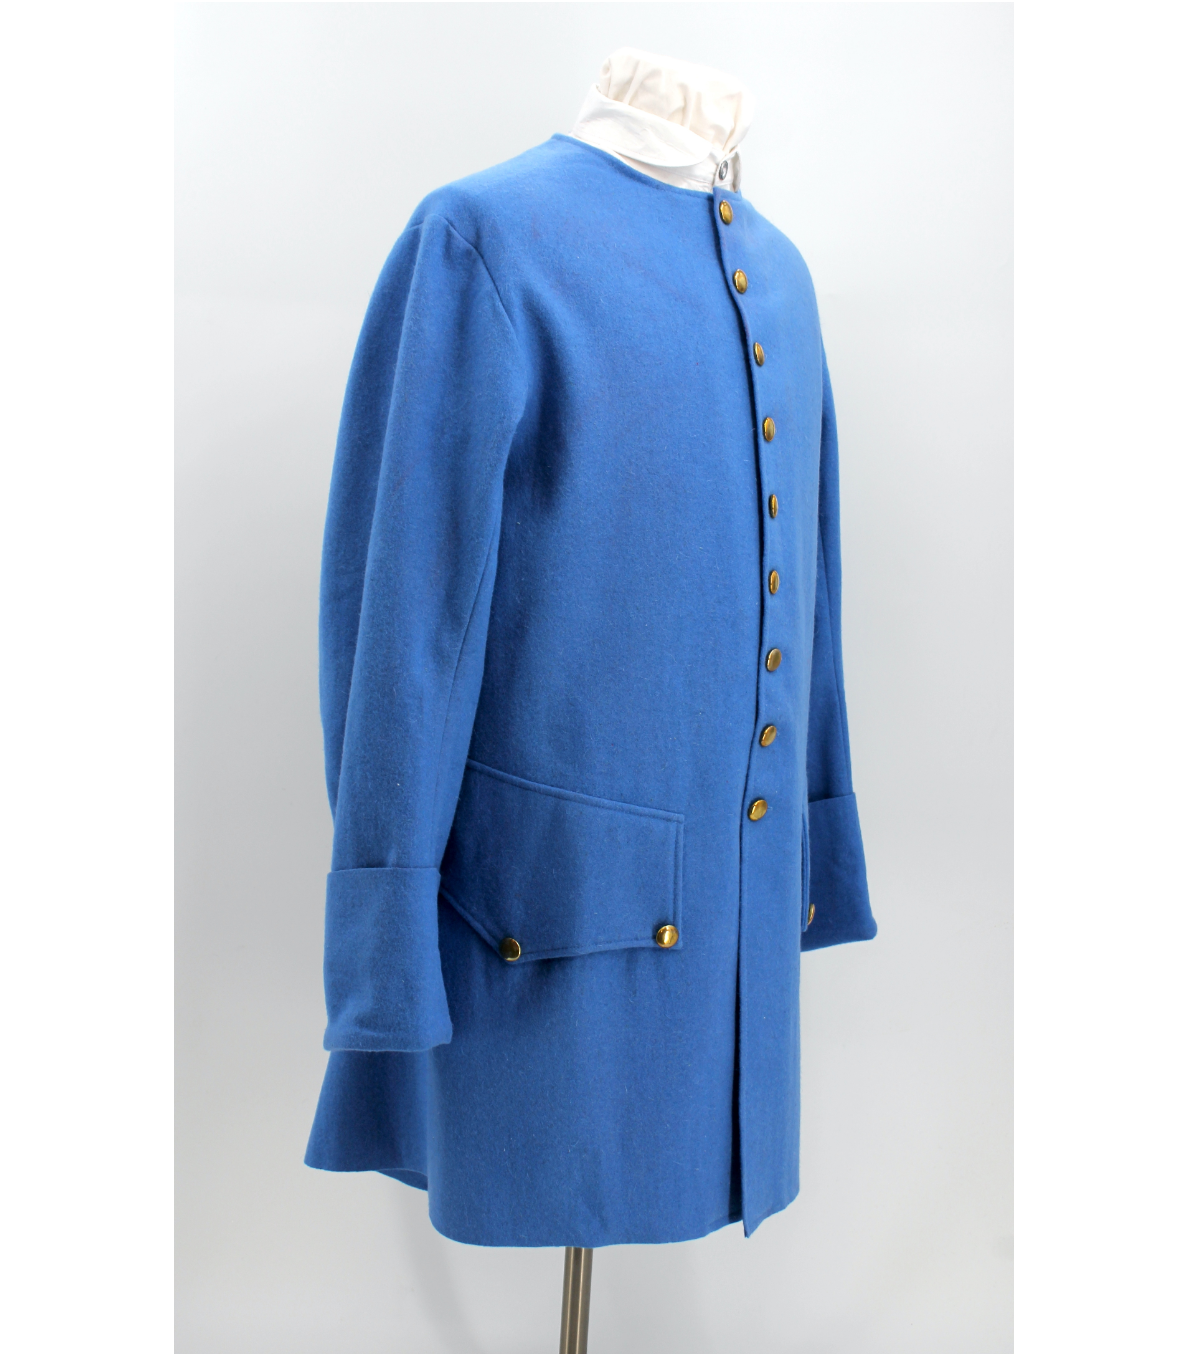 Colonial Chic: French Blue Sleeved Waistcoat for French & Indian War Reenactments"